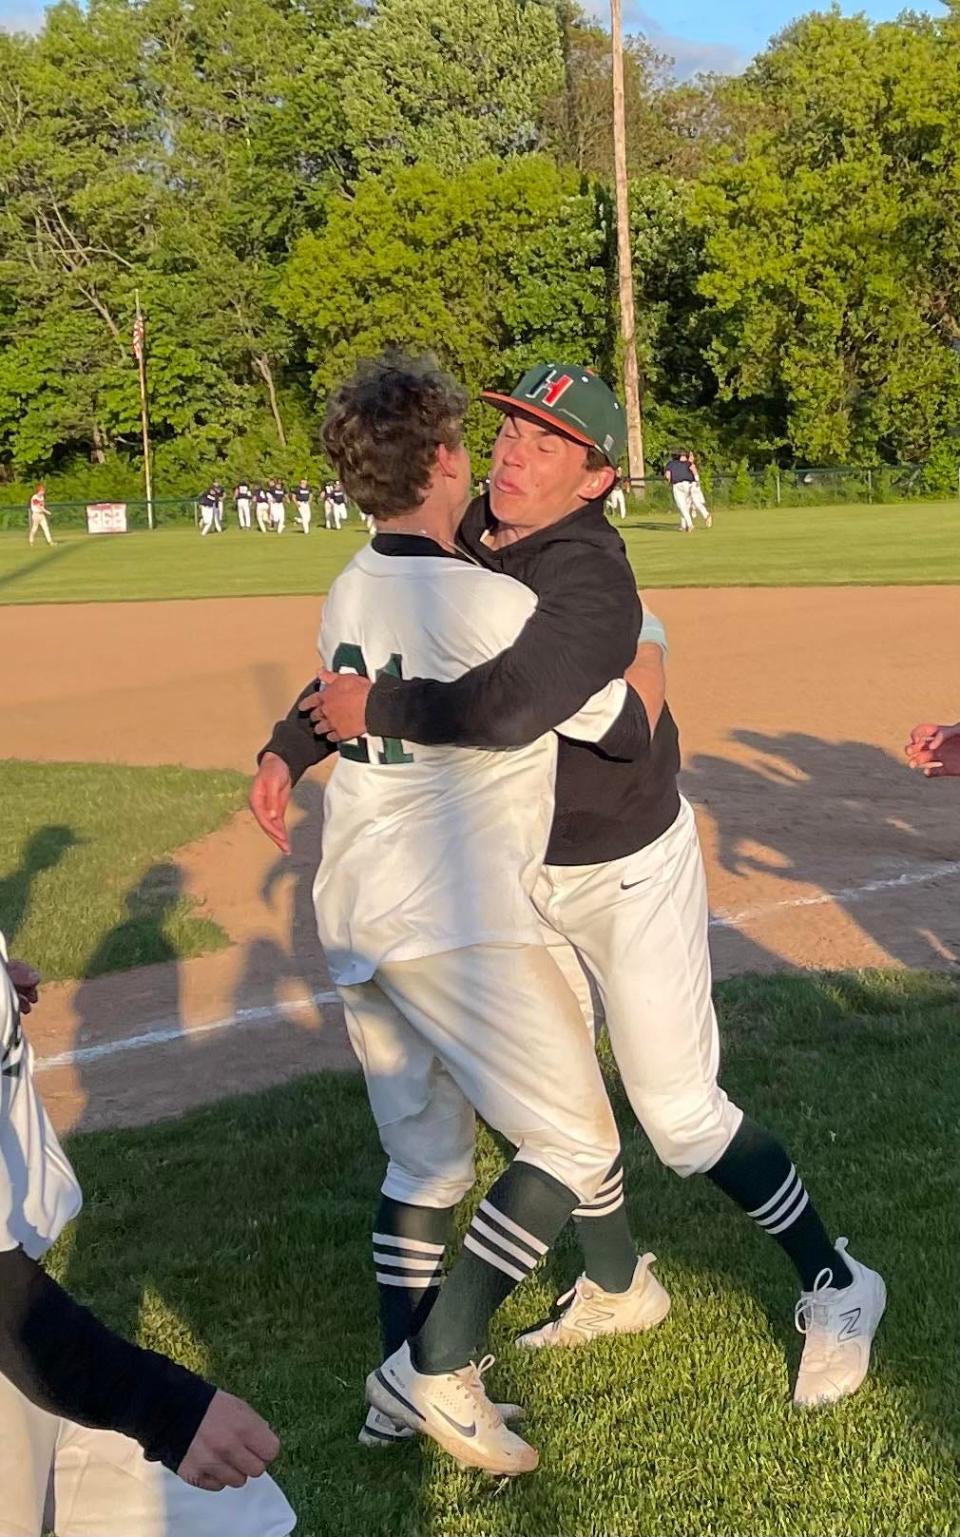 Hopkinton's Dylan Ruff (21) gets a hug after hitting the game-winning single with two outs in the bottom of the eighth inning against Franklin Thursday in the Pedroli Classic.